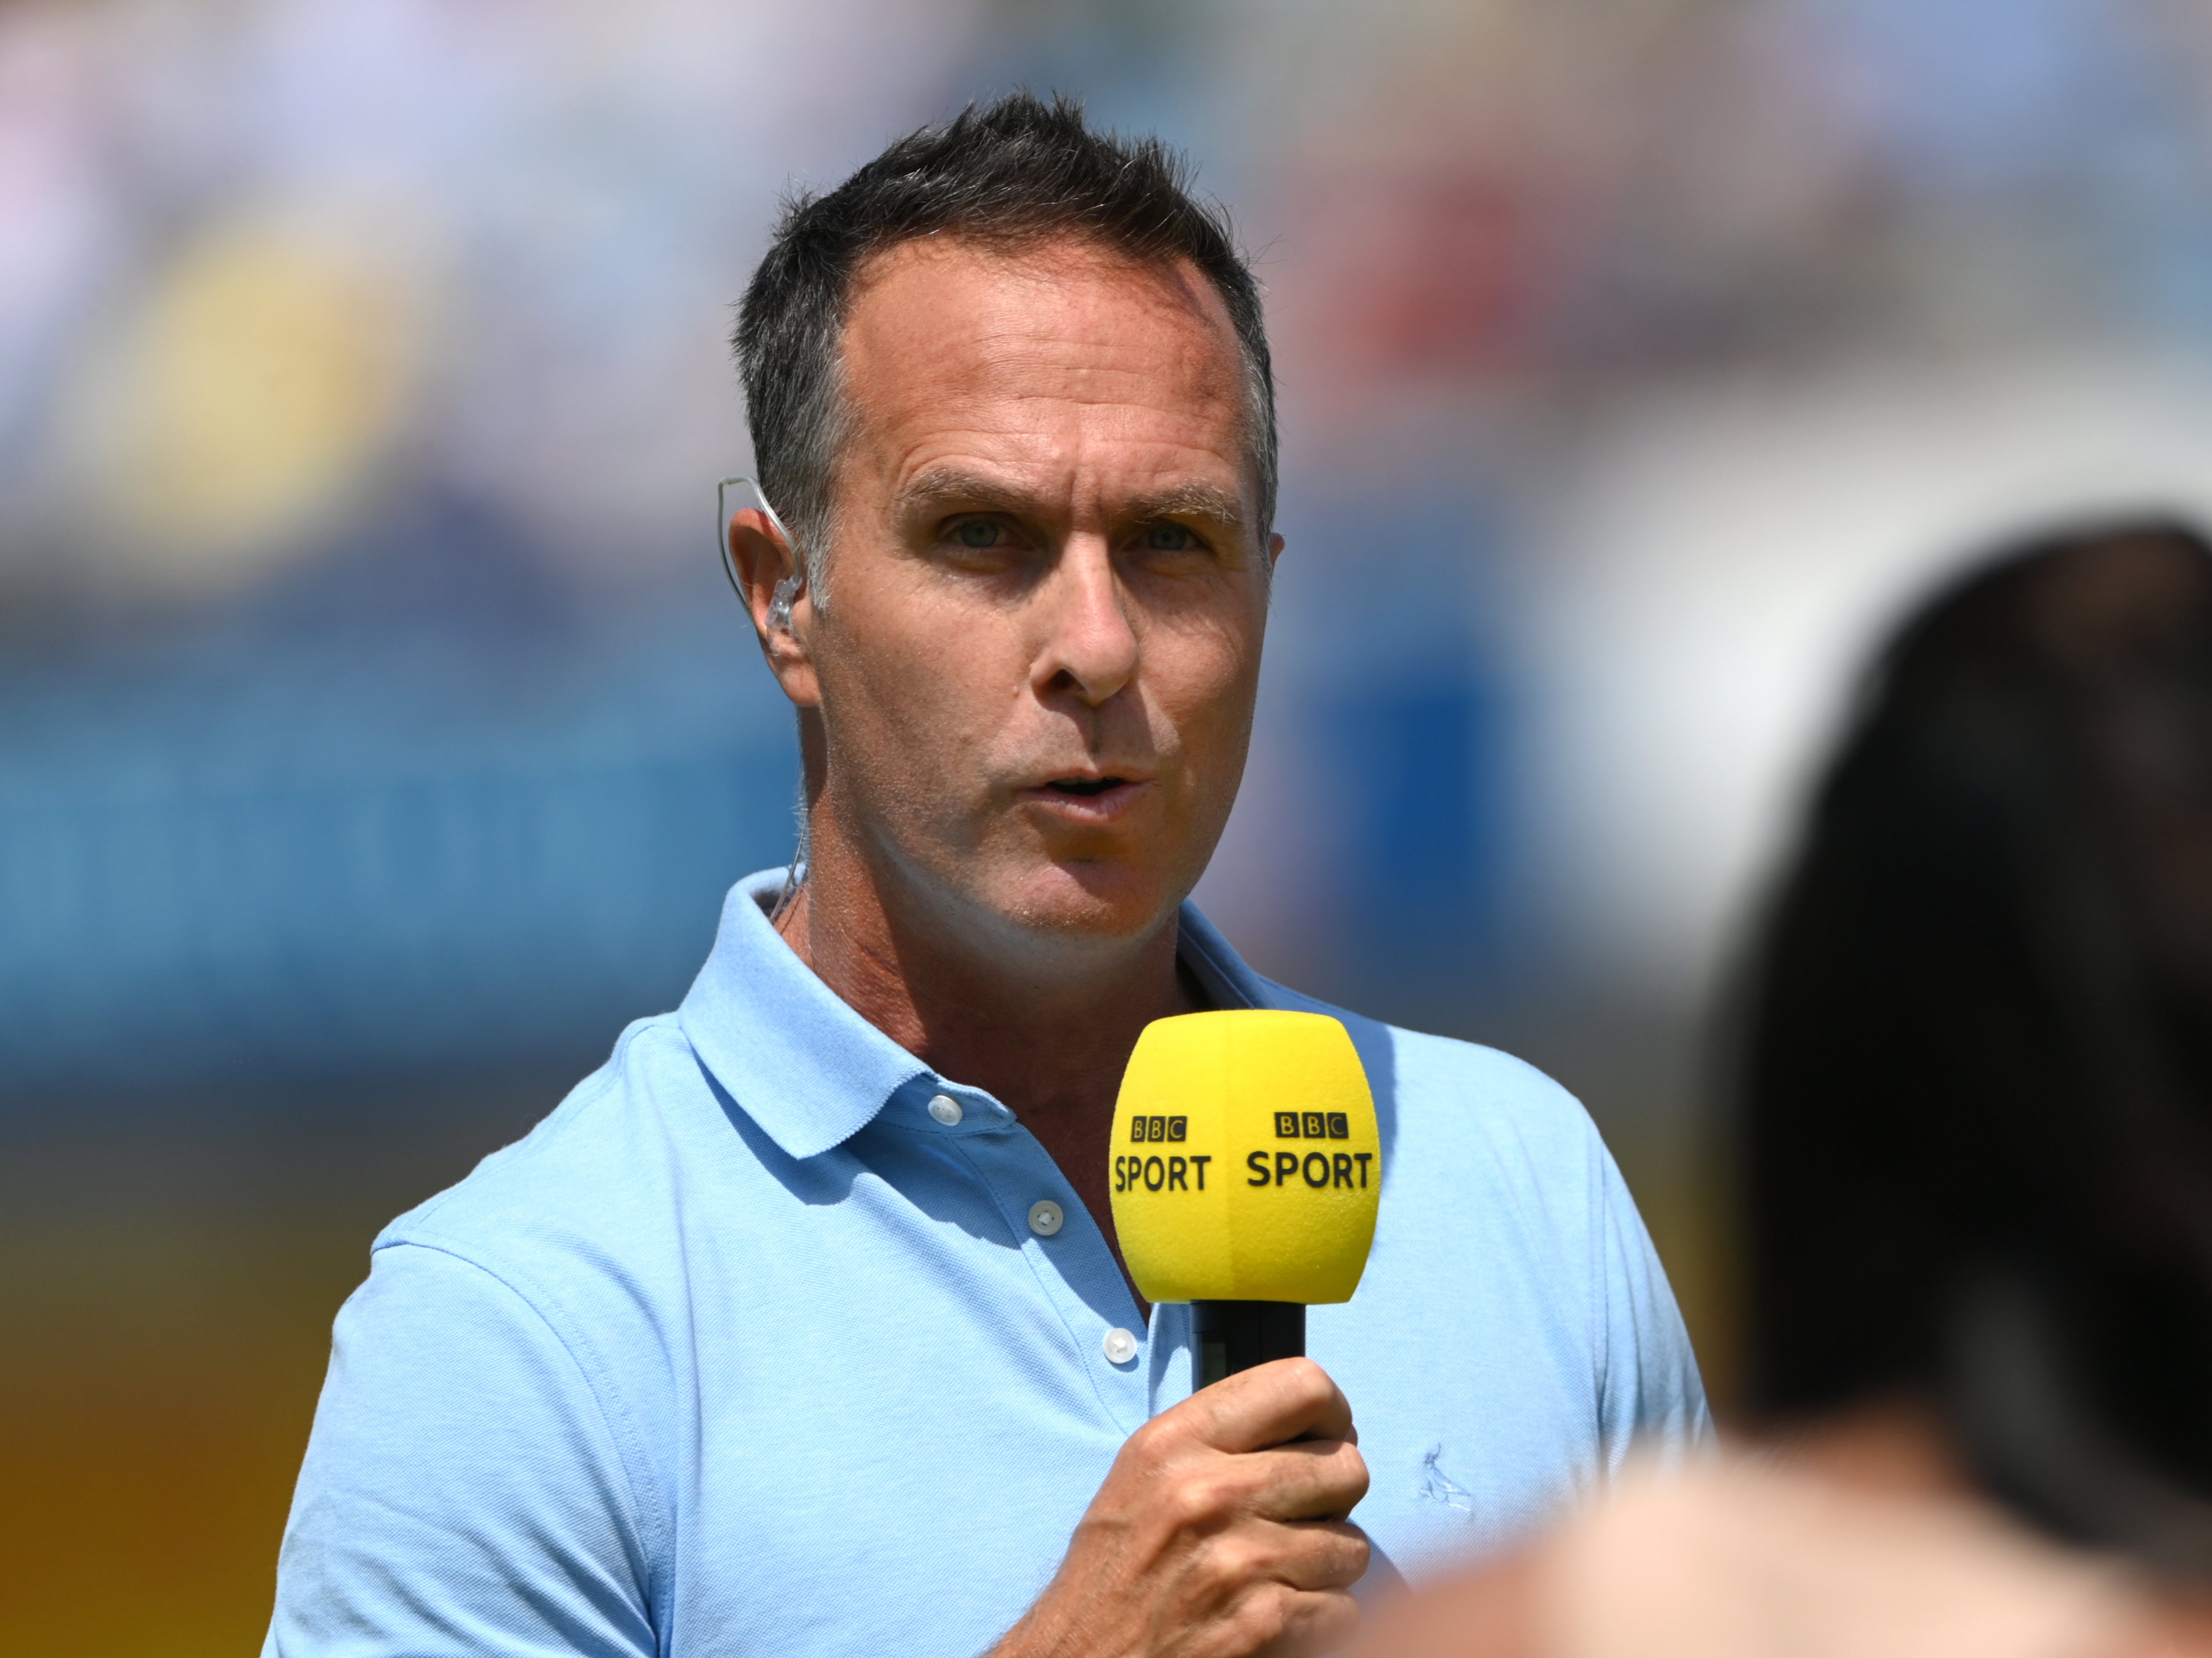 Michael Vaughan has apologised for ‘hurt’ suffered by his former Yorkshire teammate Azeem Rafiq